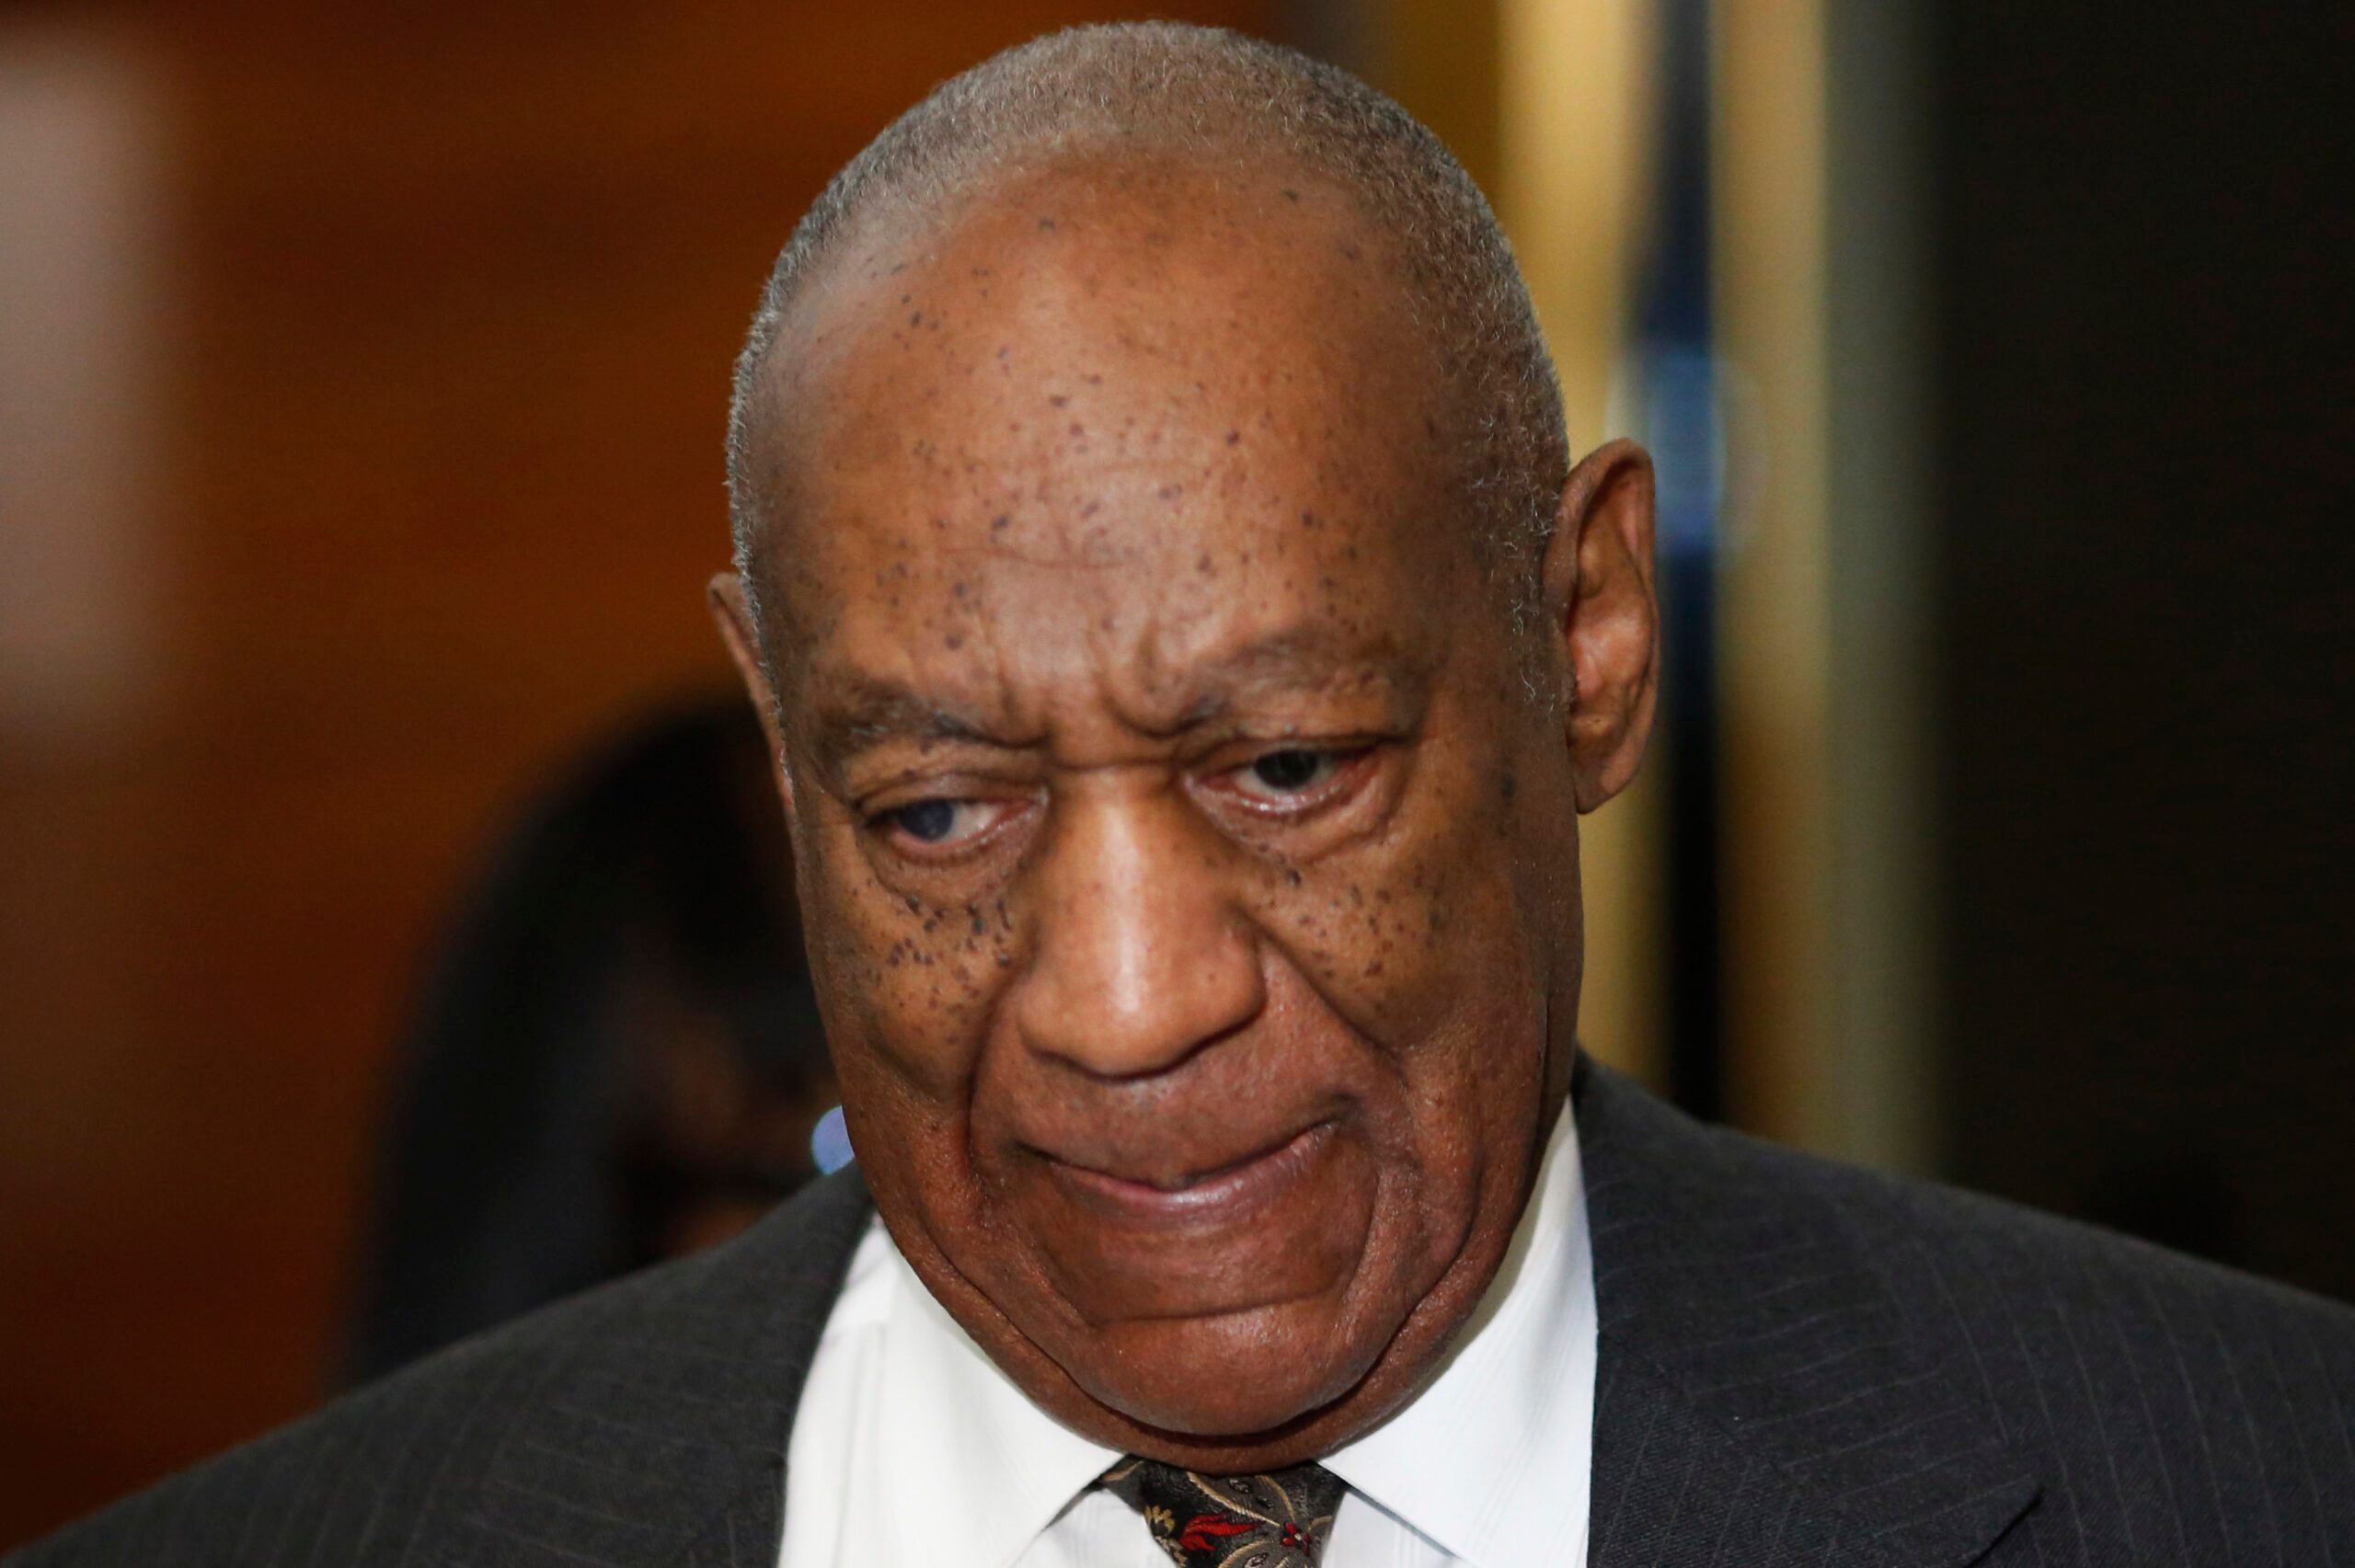 Bill Cosby to stand trial for sexual assault, judge rules